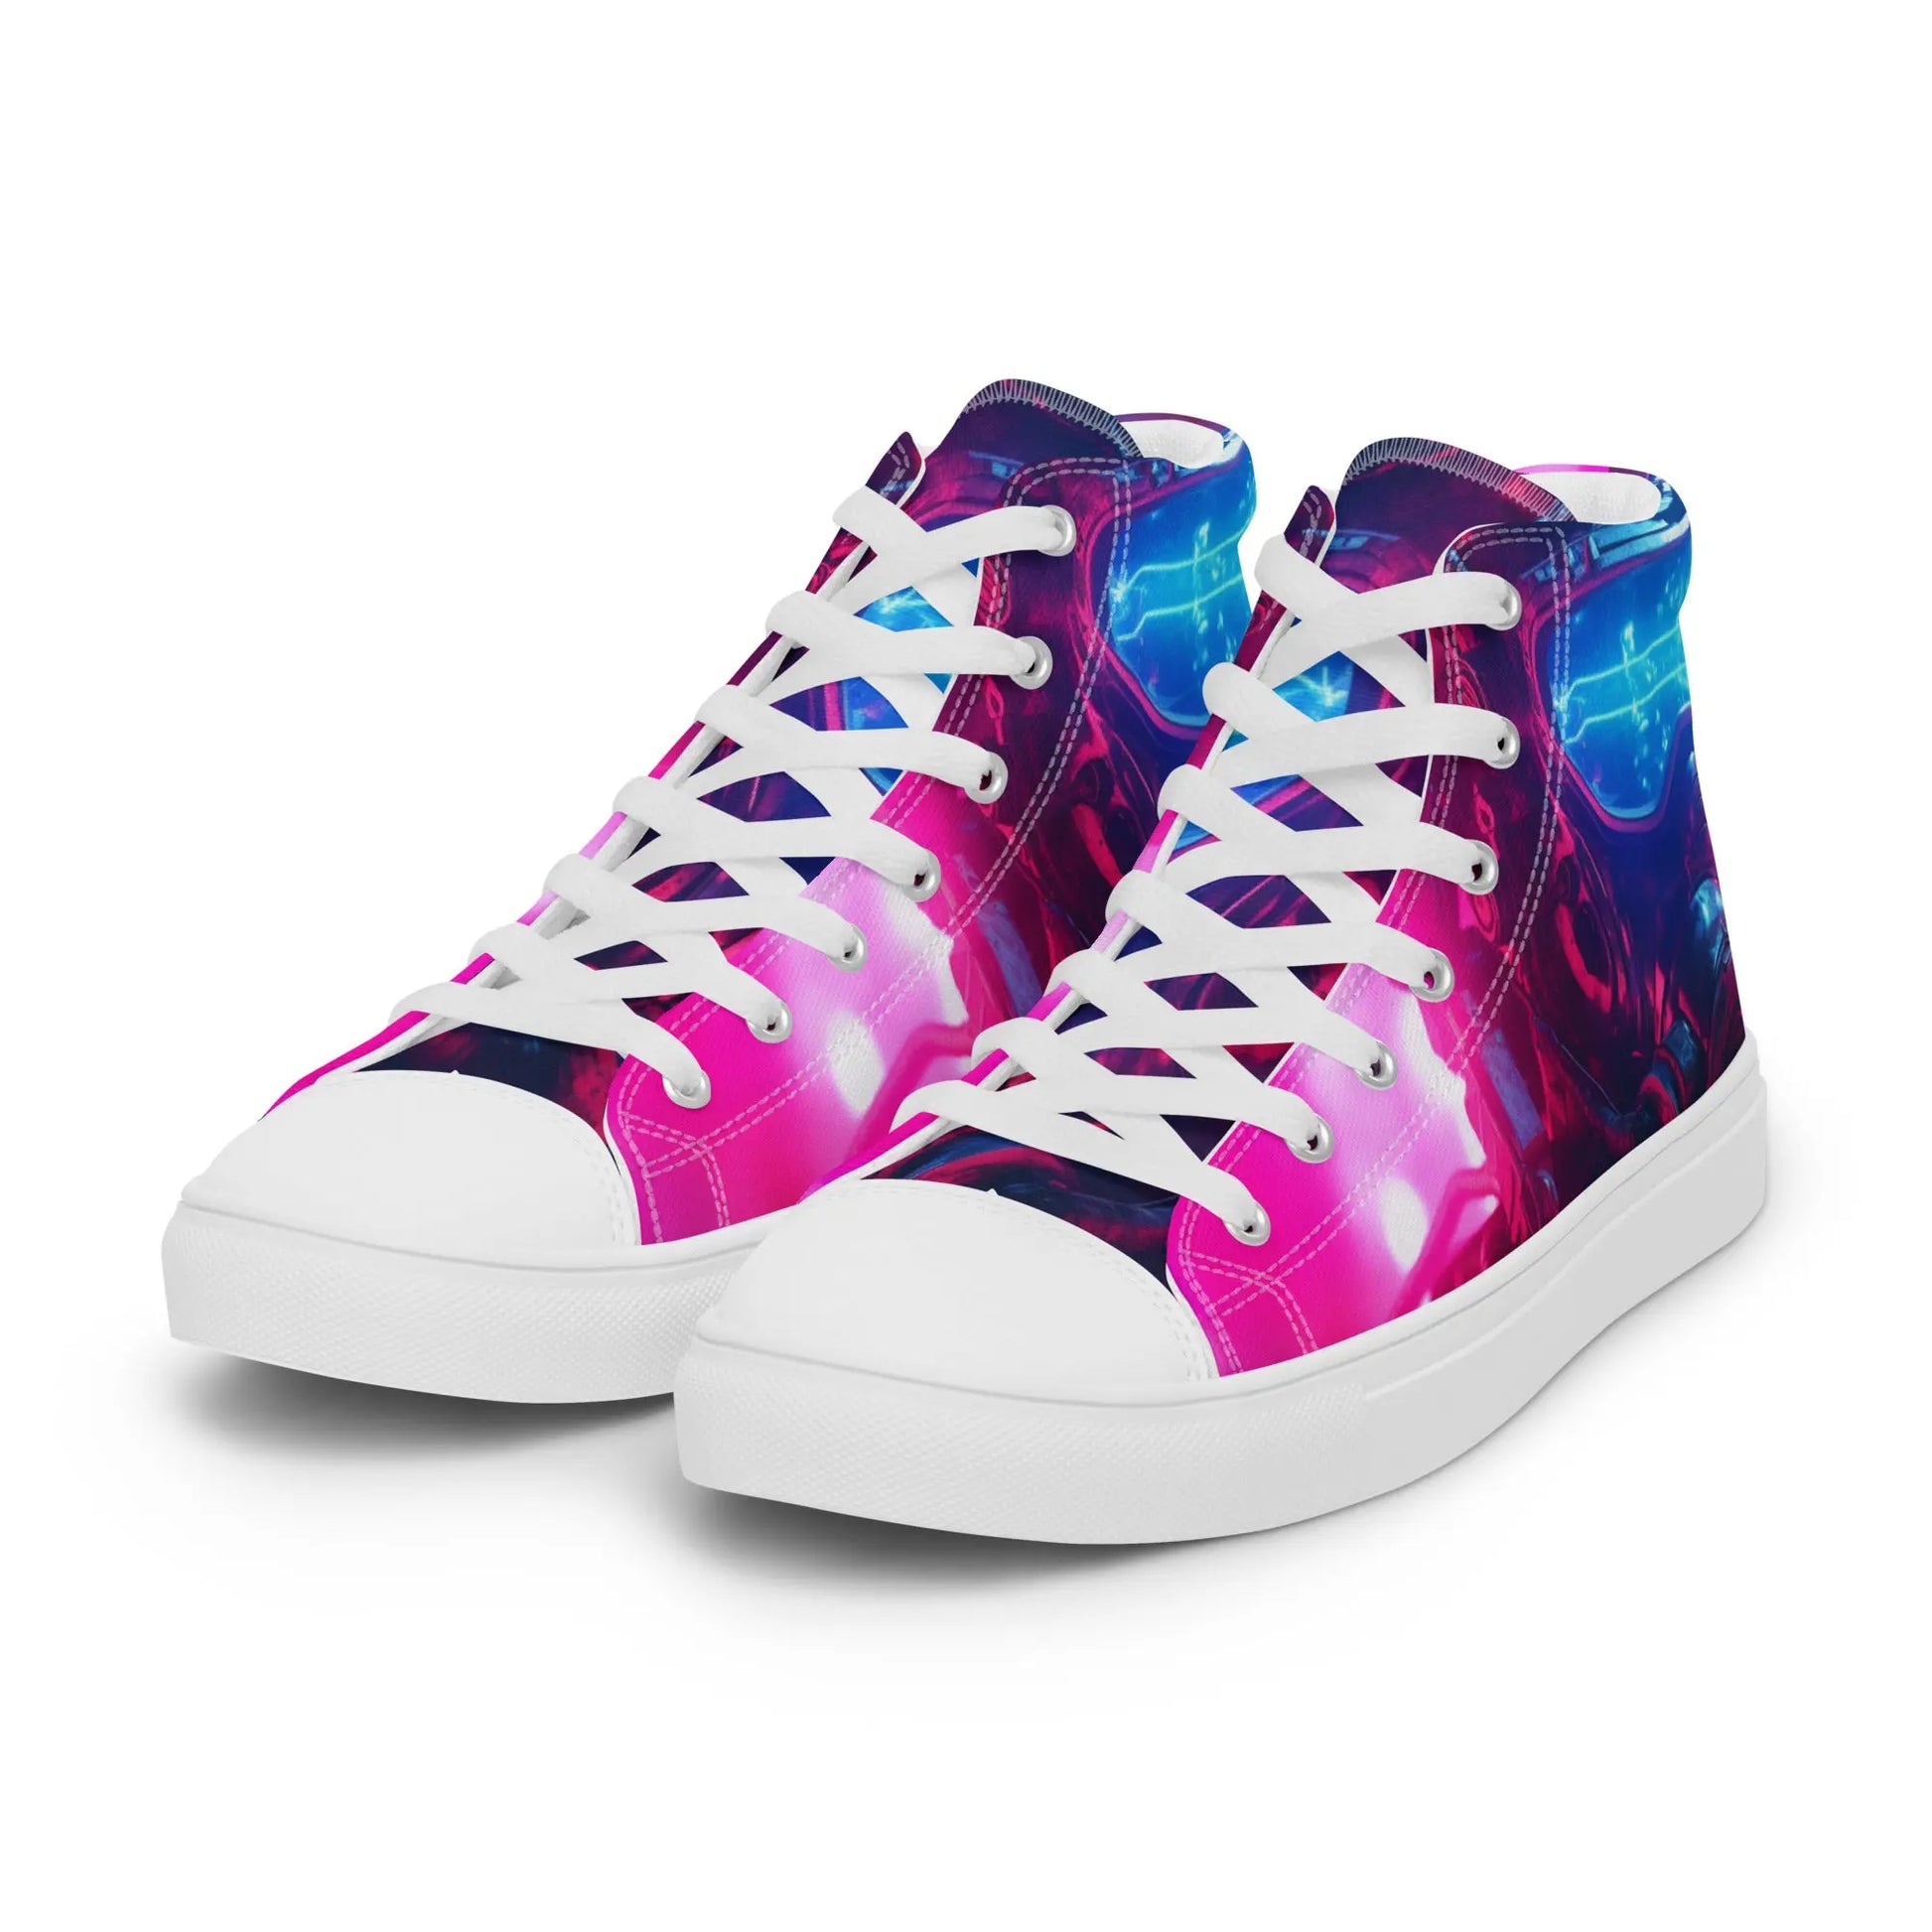 StormStrike High Top Sneakers: AI-Engineered, Unisex, Embrace the Electrifying Warrior, Durable, Comfortable, Thunder-Themed Footwear Kinetic Footwear